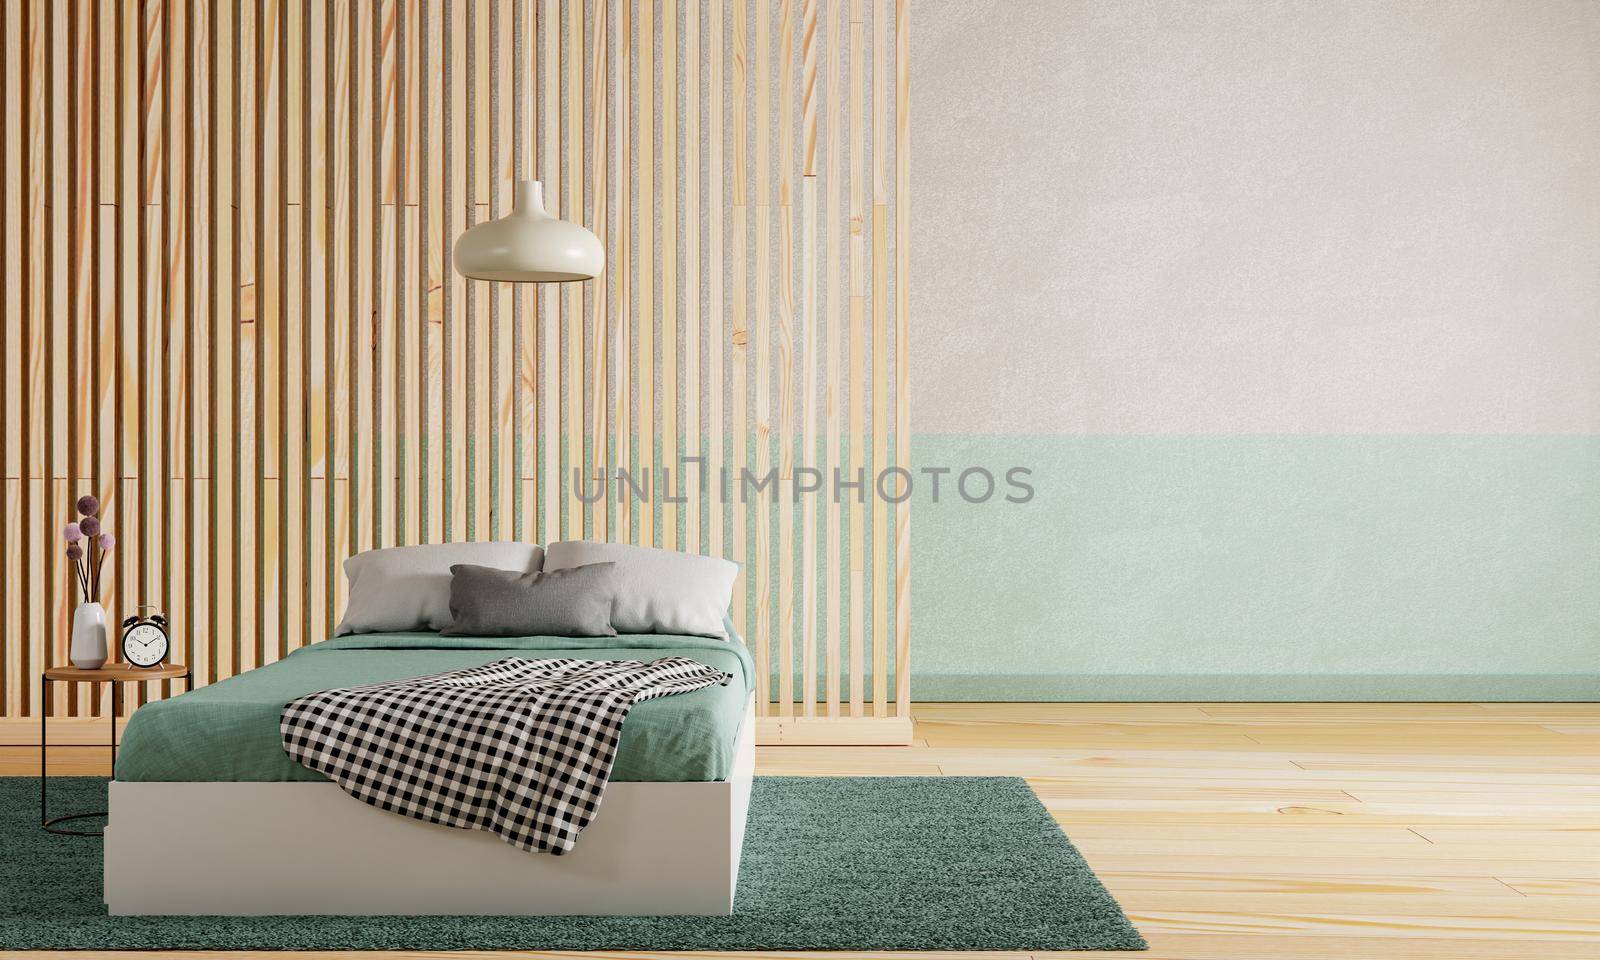 Green bedroom with wooden floor and partition wall and white green color raw concrete background. Interior and Architecture concept. 3D illustration rendering